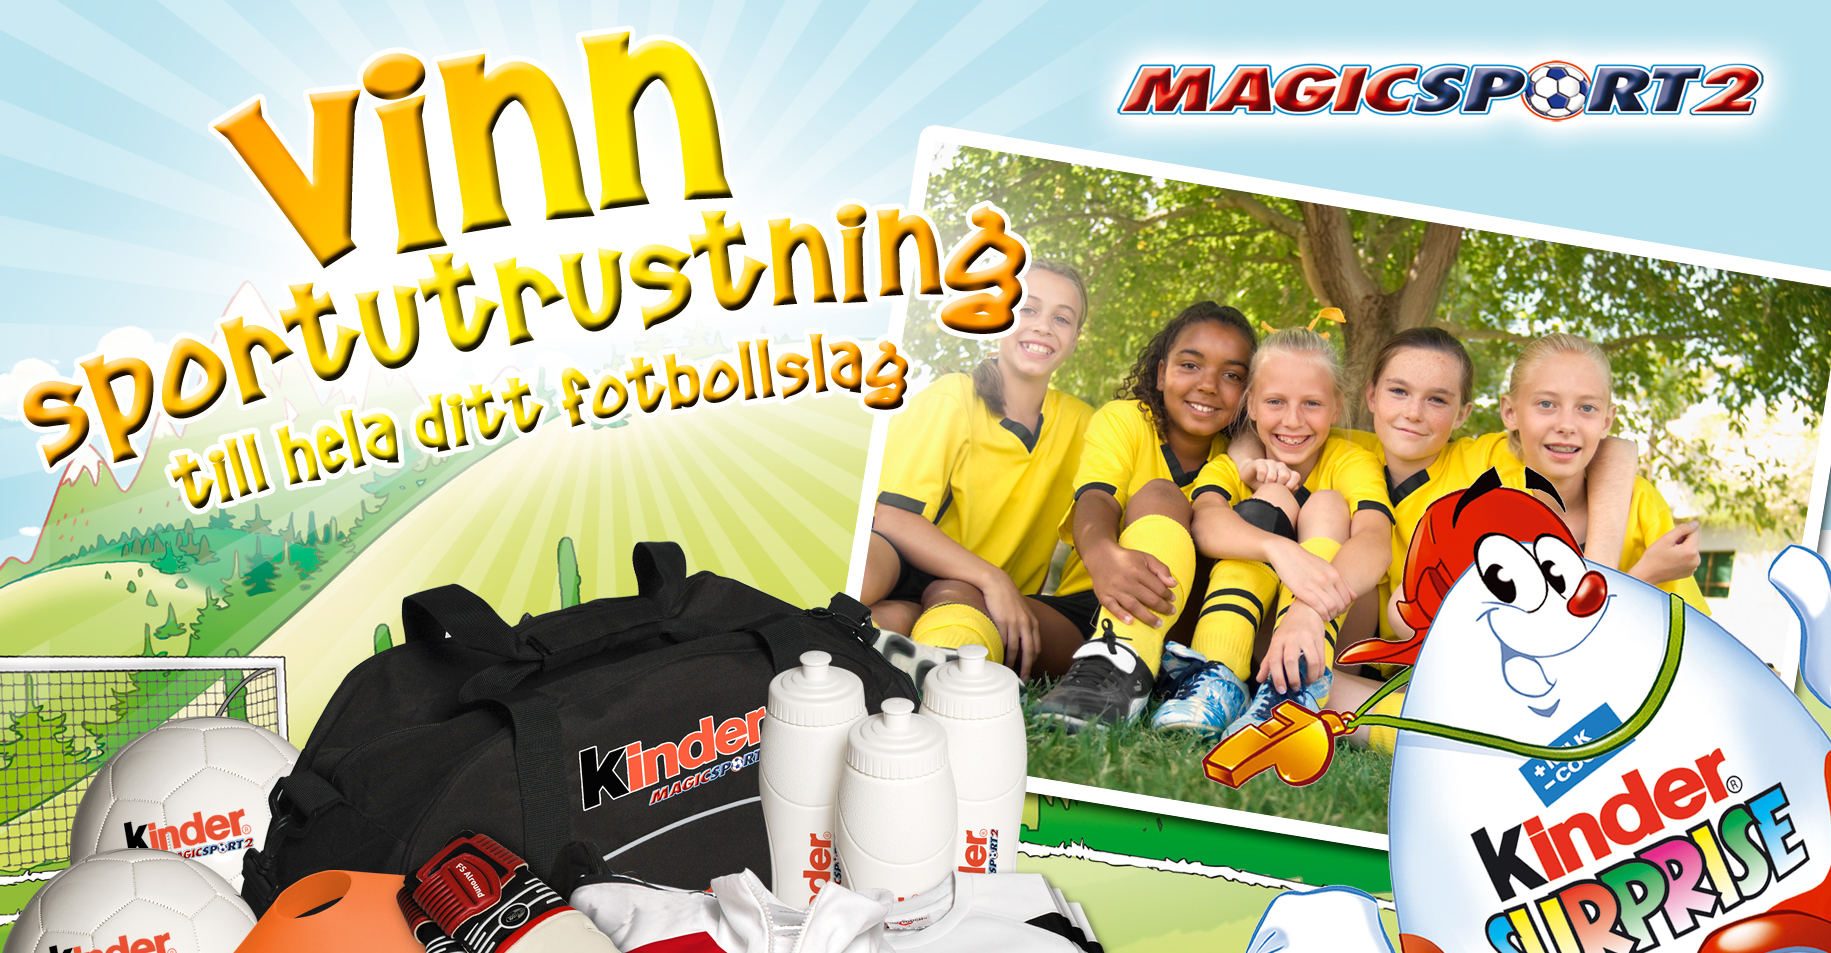 Kinder magic sport camping material for soccer teams by Adentity